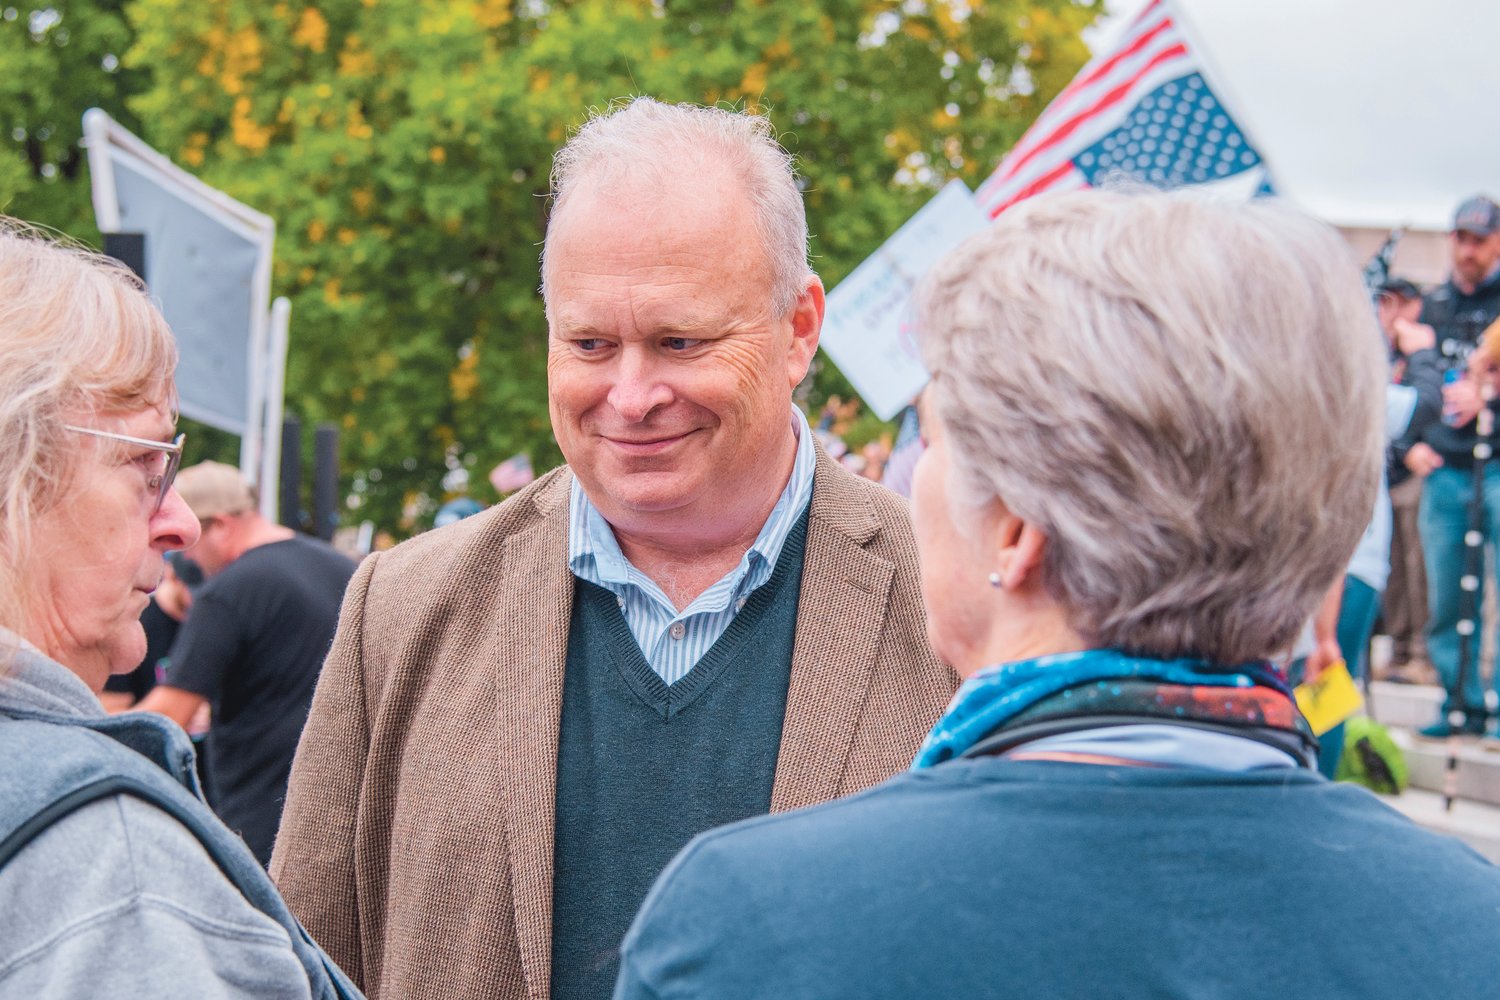 Representative Jim Walsh smiles while mingling with attendees of a “Medical Freedom Rally” outside the Washington State Capitol Building Sunday afternoon in Olympia.